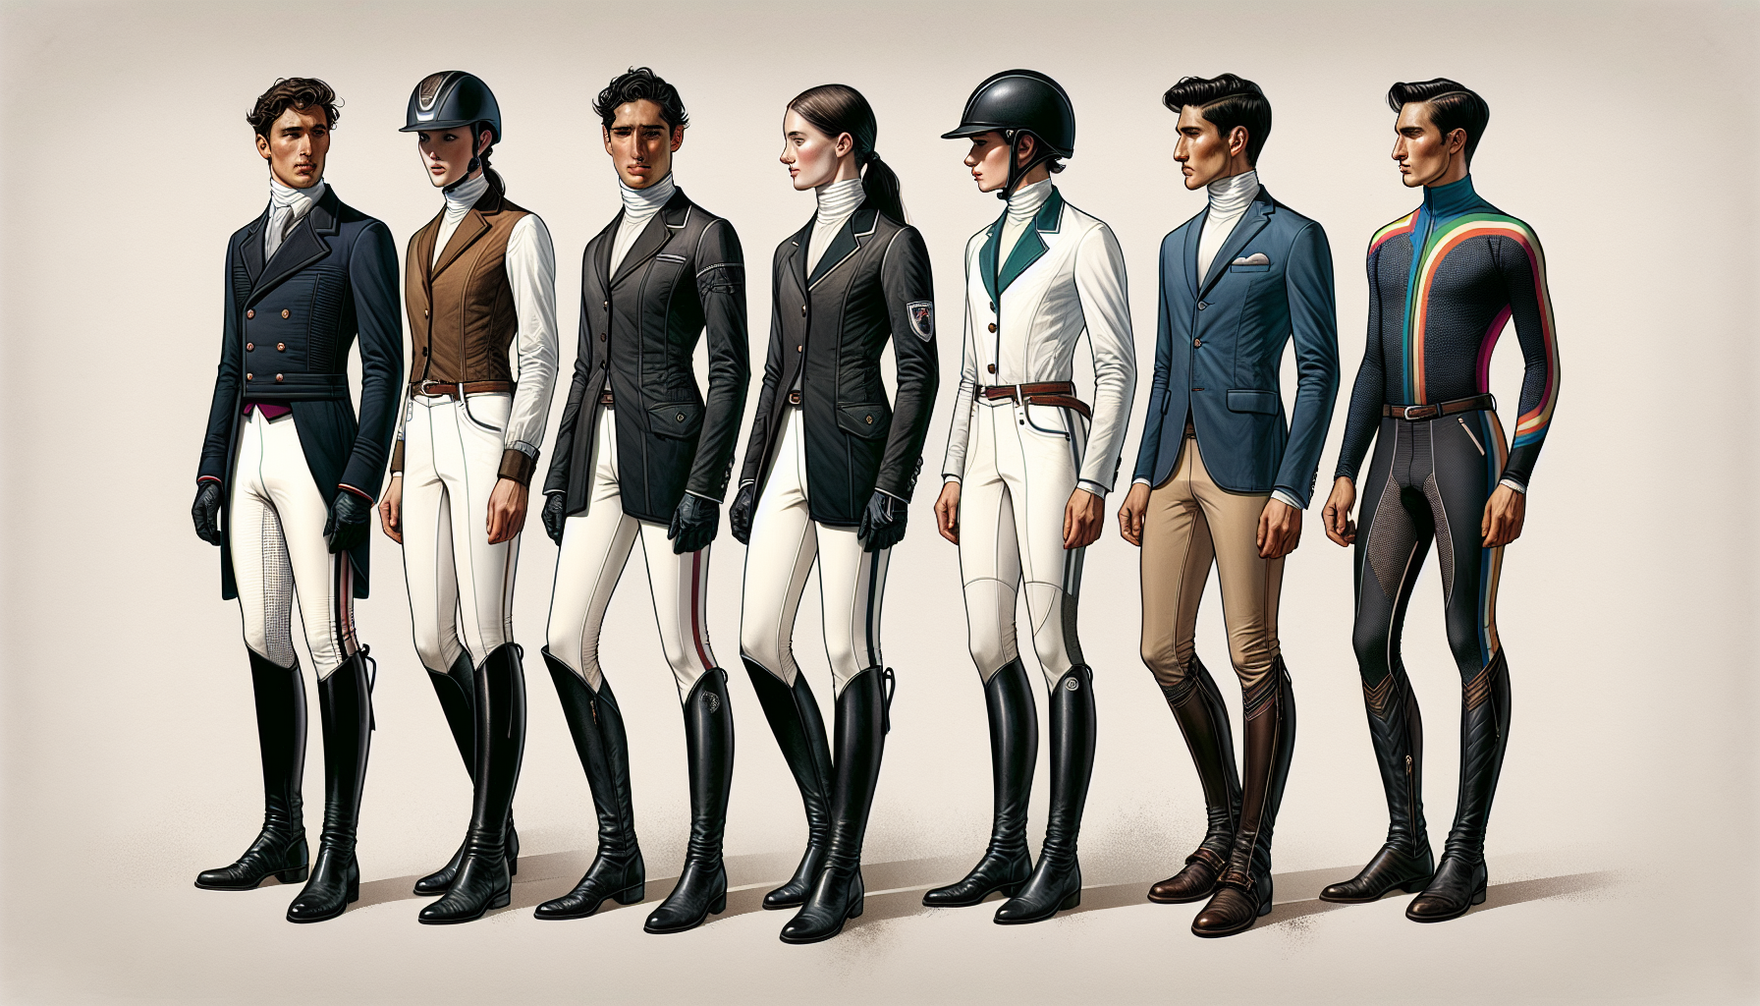 A depiction of the latest trends in competitive equestrian attire, showcasing a variety of styles and materials. On the left, we can visualize a male rider of Hispanic descent outfitted in a tradition